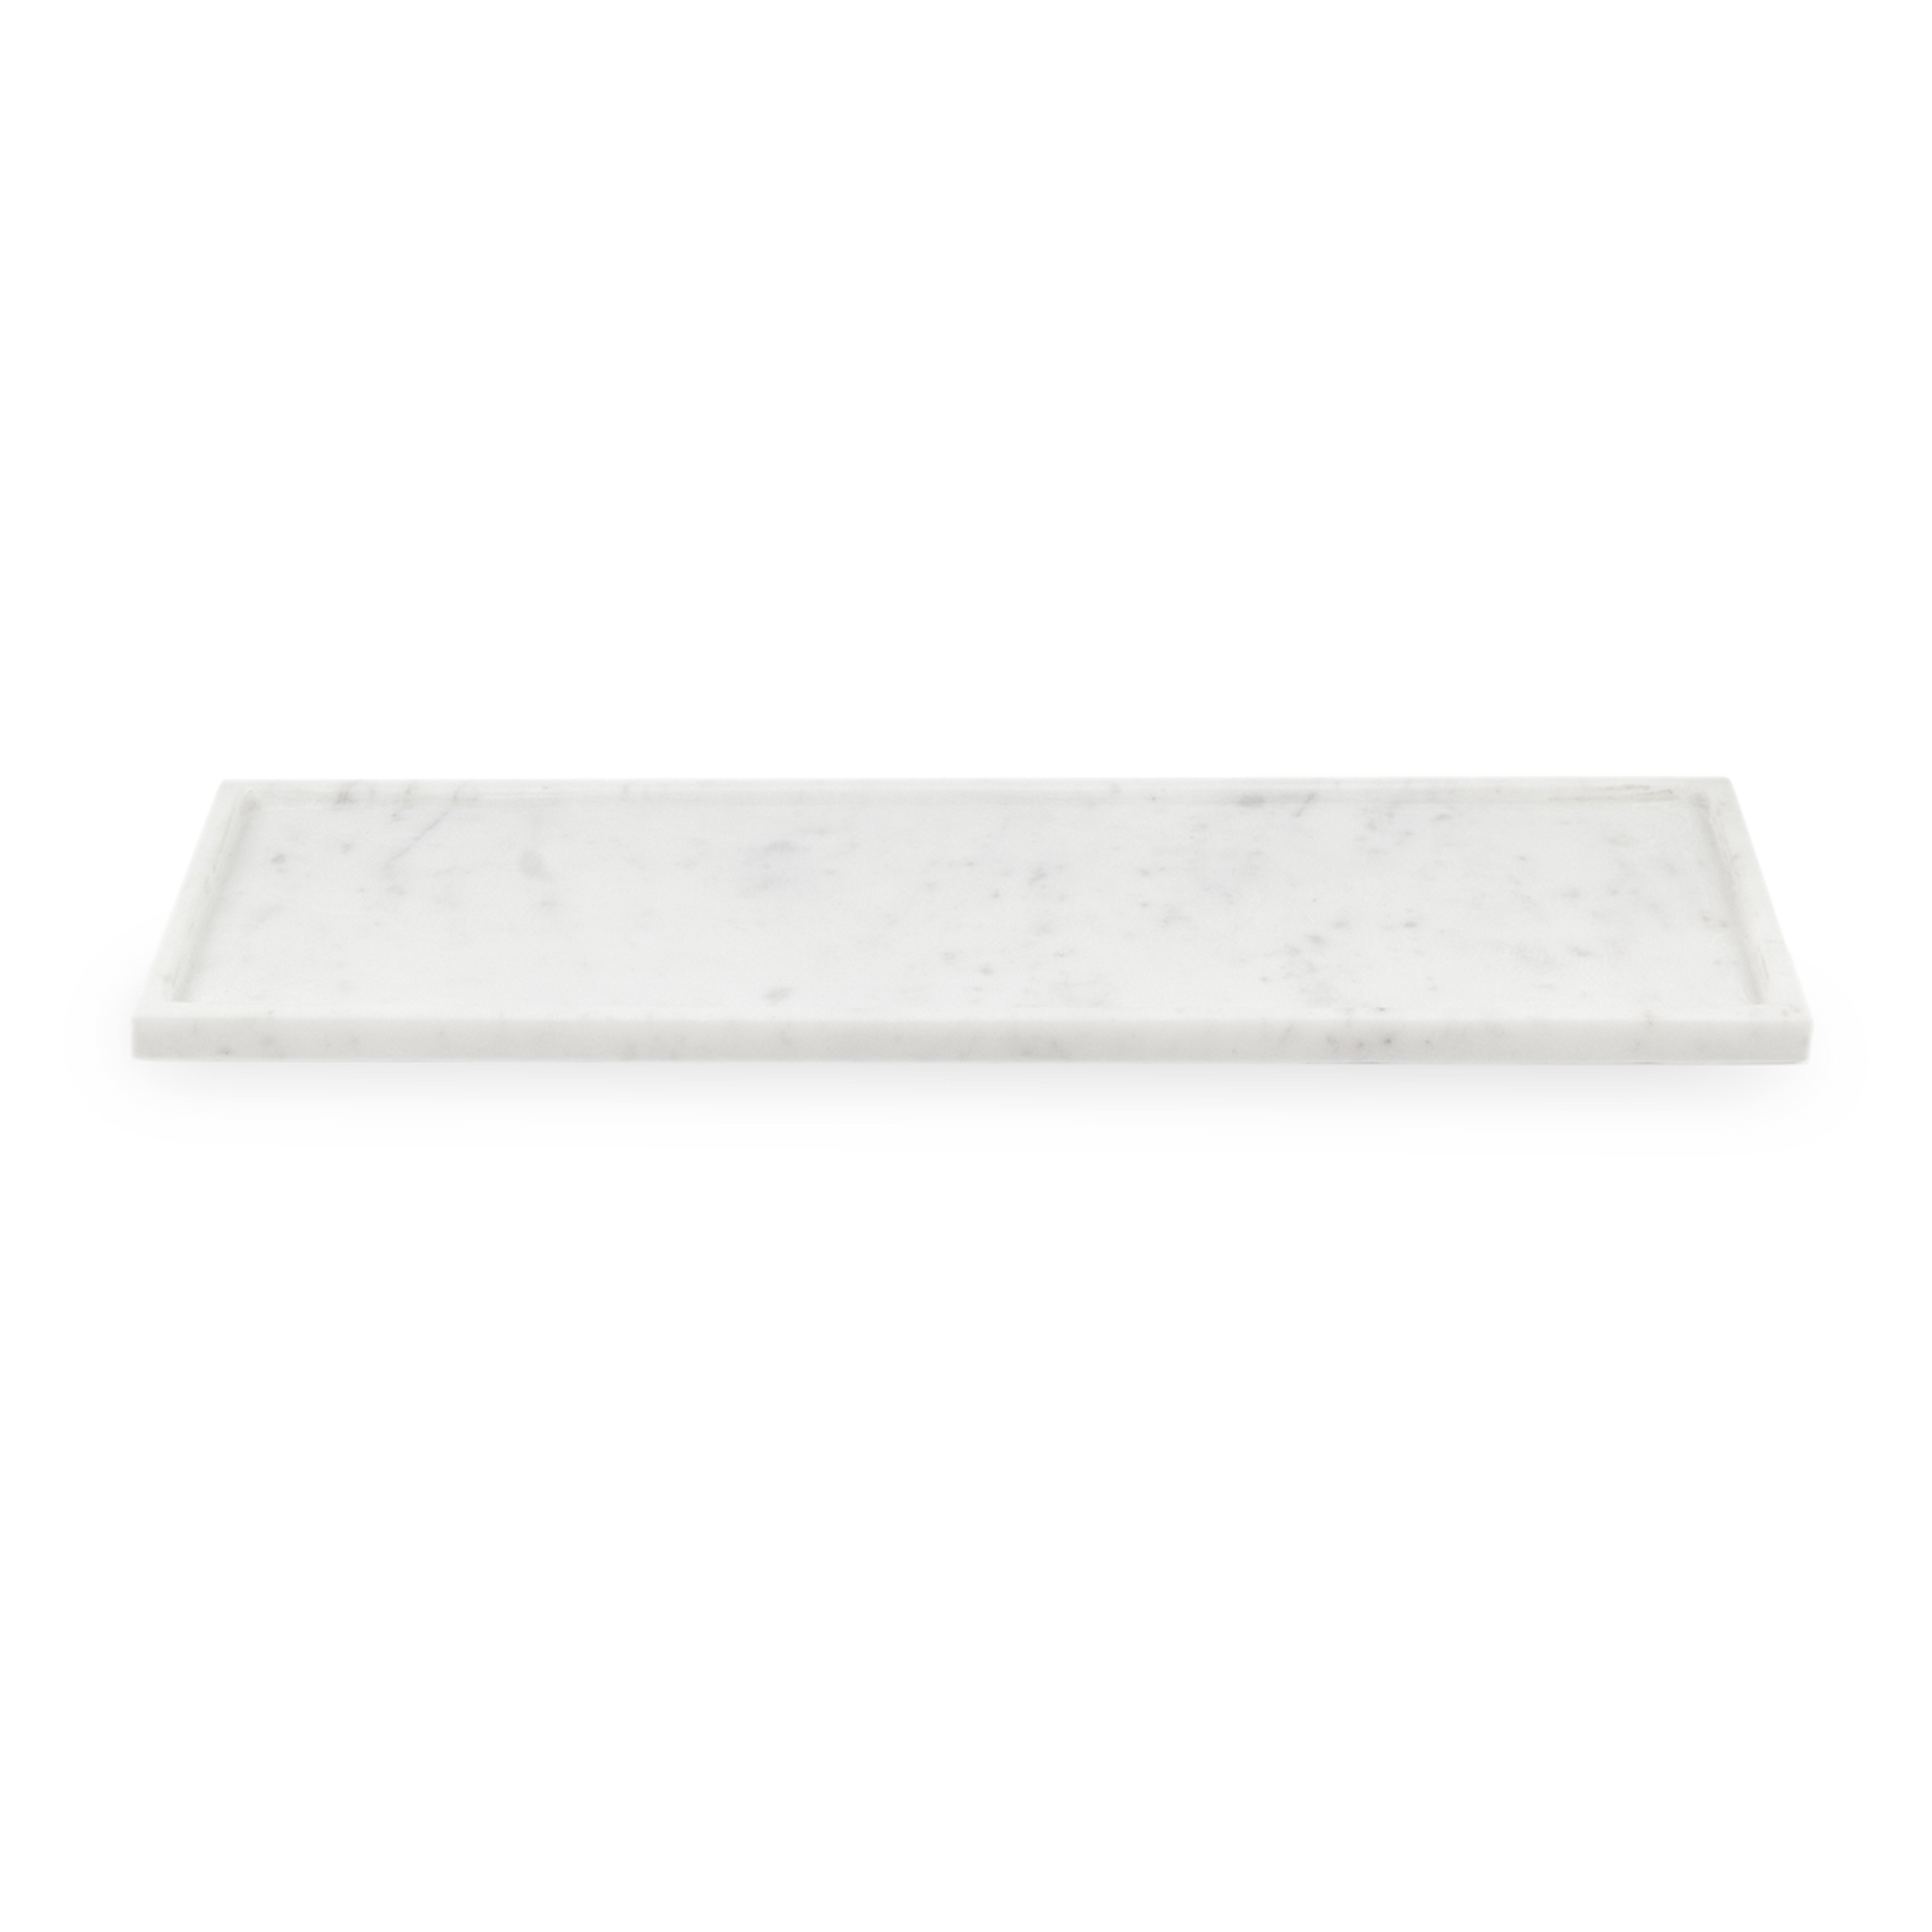 Beautifully handcrafted in India by skilled artisans, this marble tray is made from white marble with natural purple and grey veins.